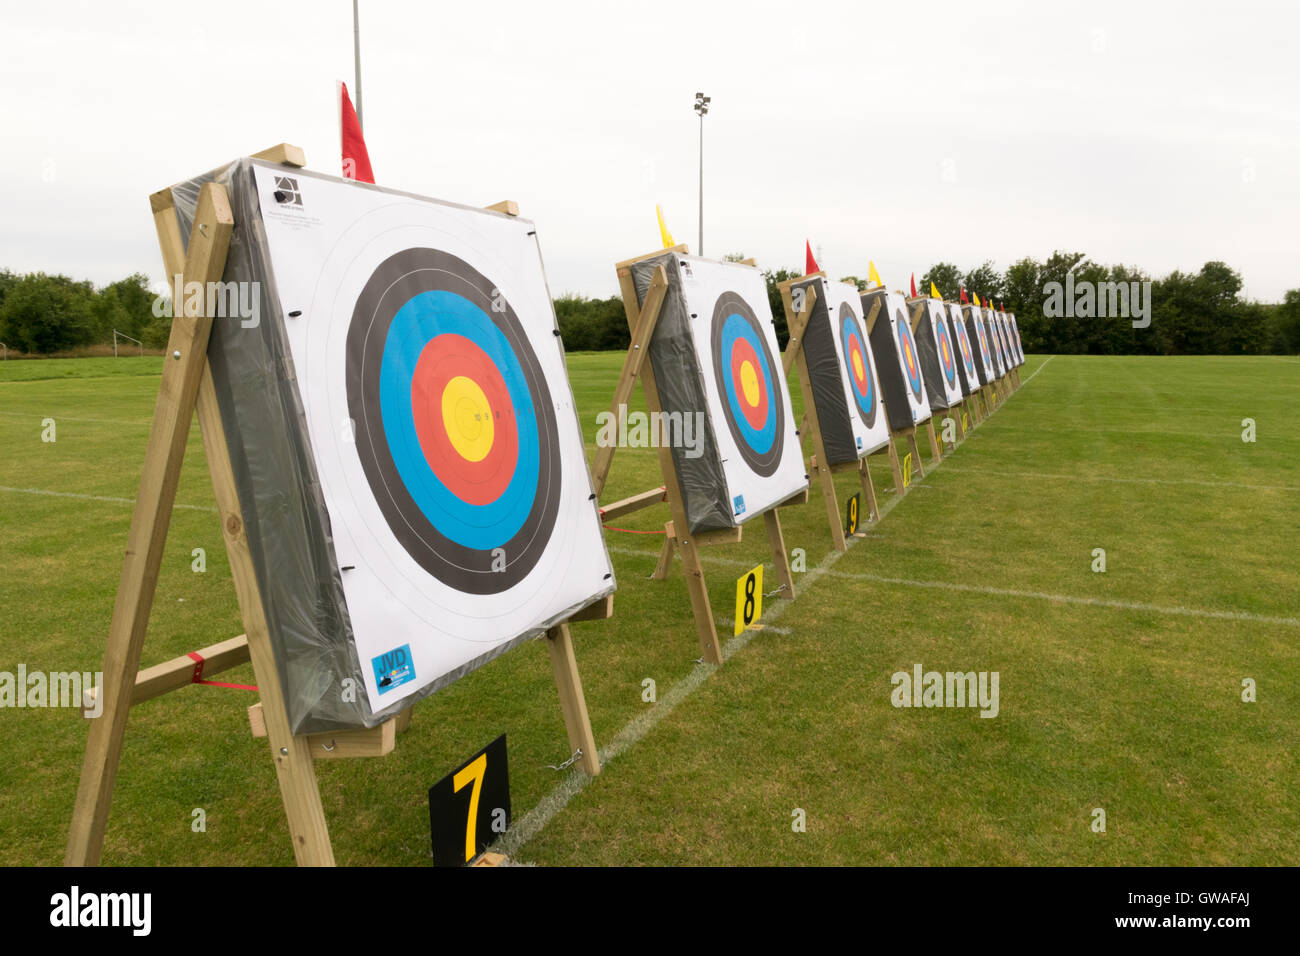 New target faces on targets at world archery competition Stock Photo